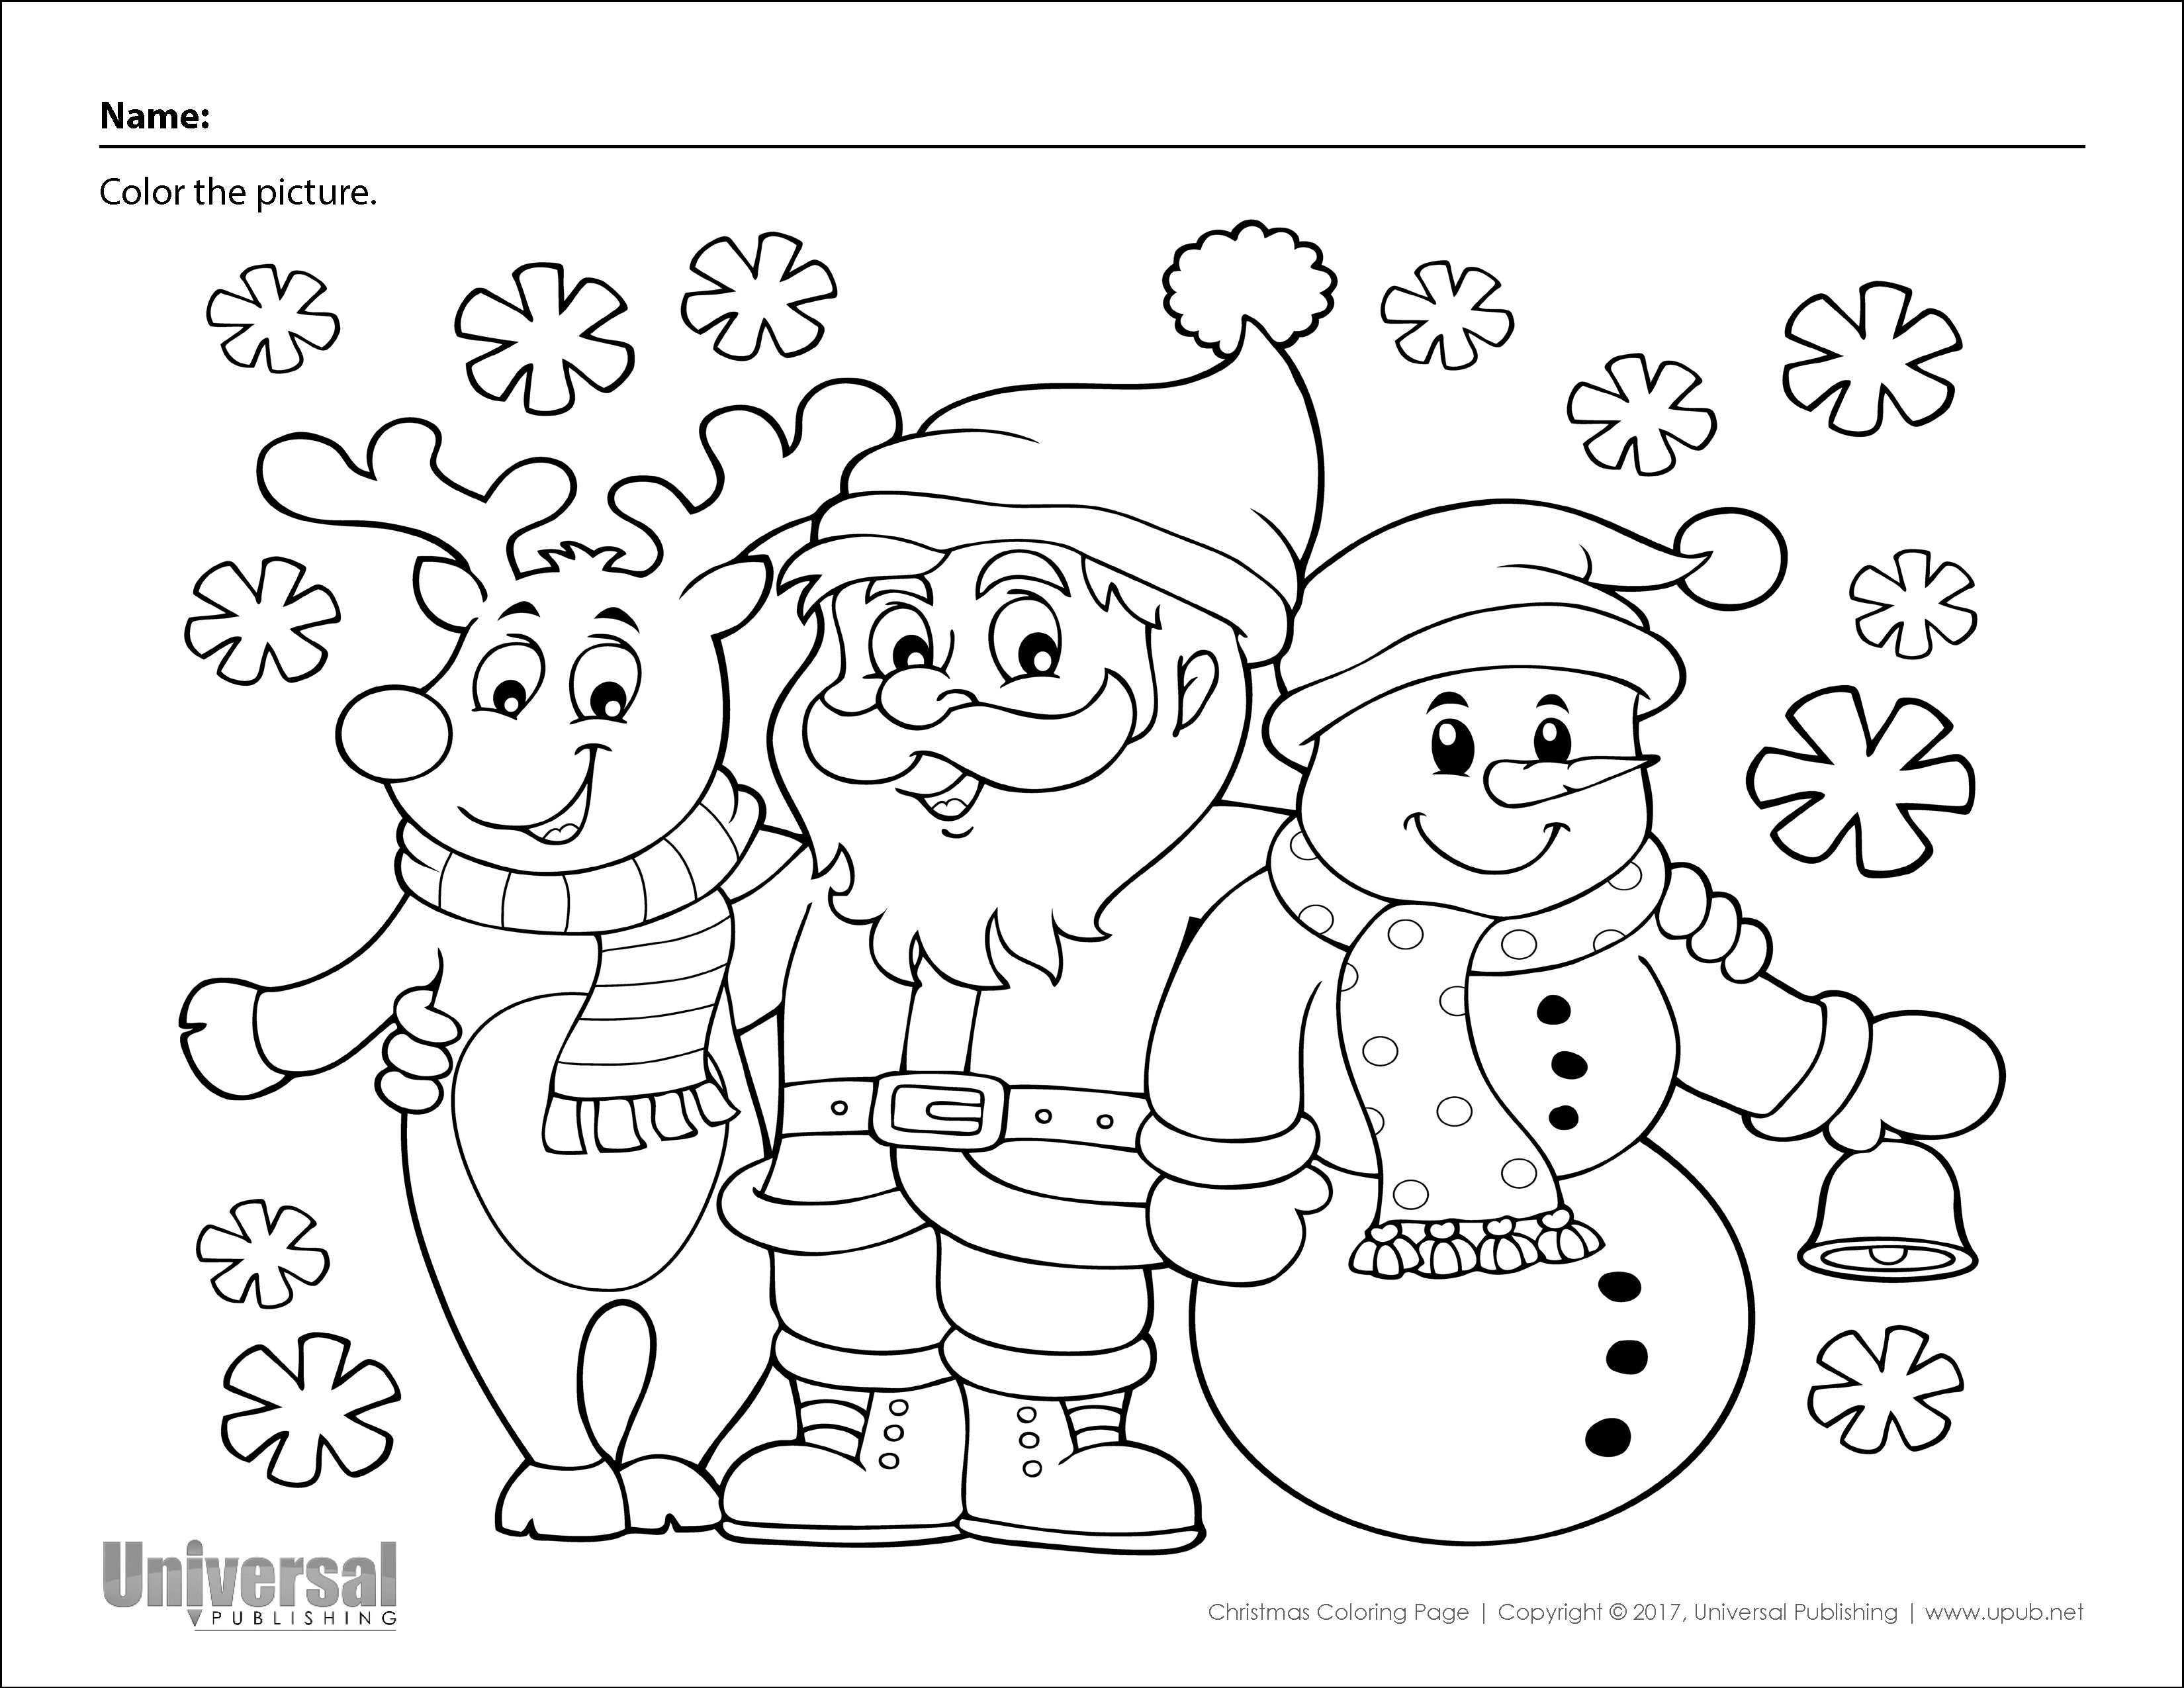 Download Christmas Online Coloring Pages Pictures – Tunnel To Viaduct Run